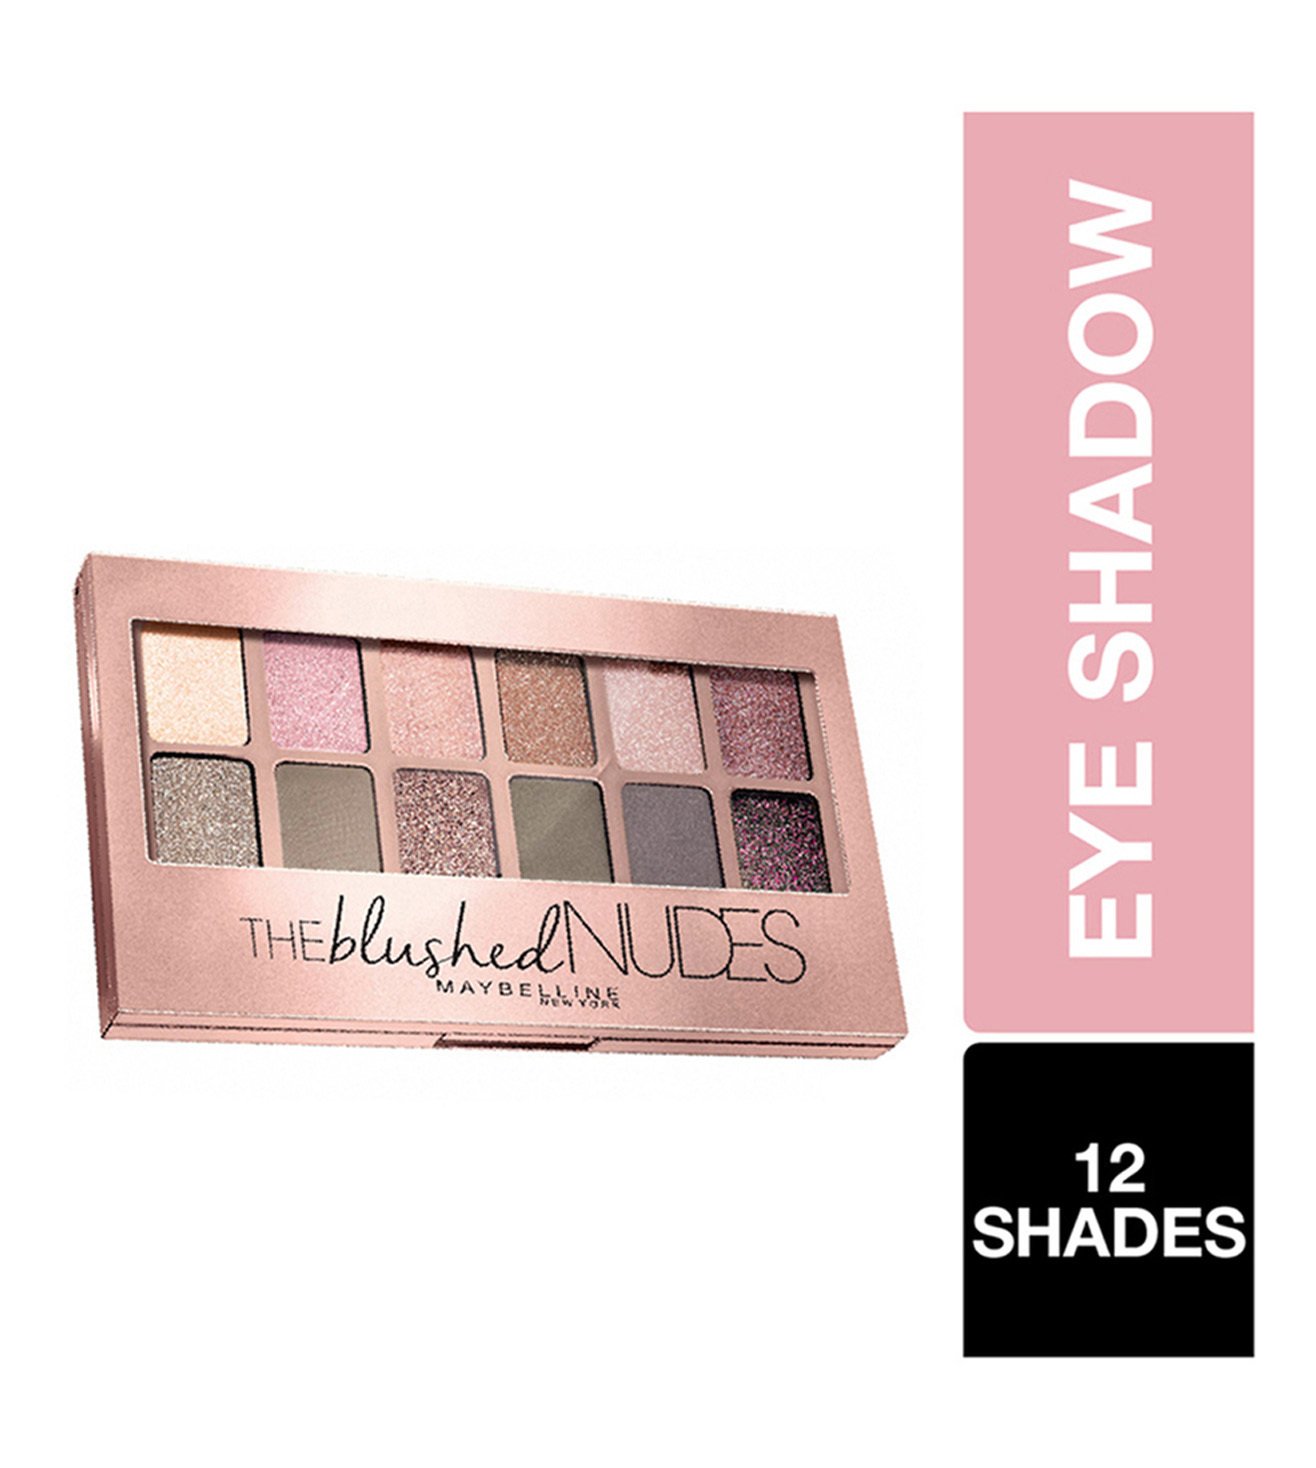 Shadow CLiQ York Tata Online 9gm Buy Palette Maybelline New Nudes On Palette, Blushed Eye The